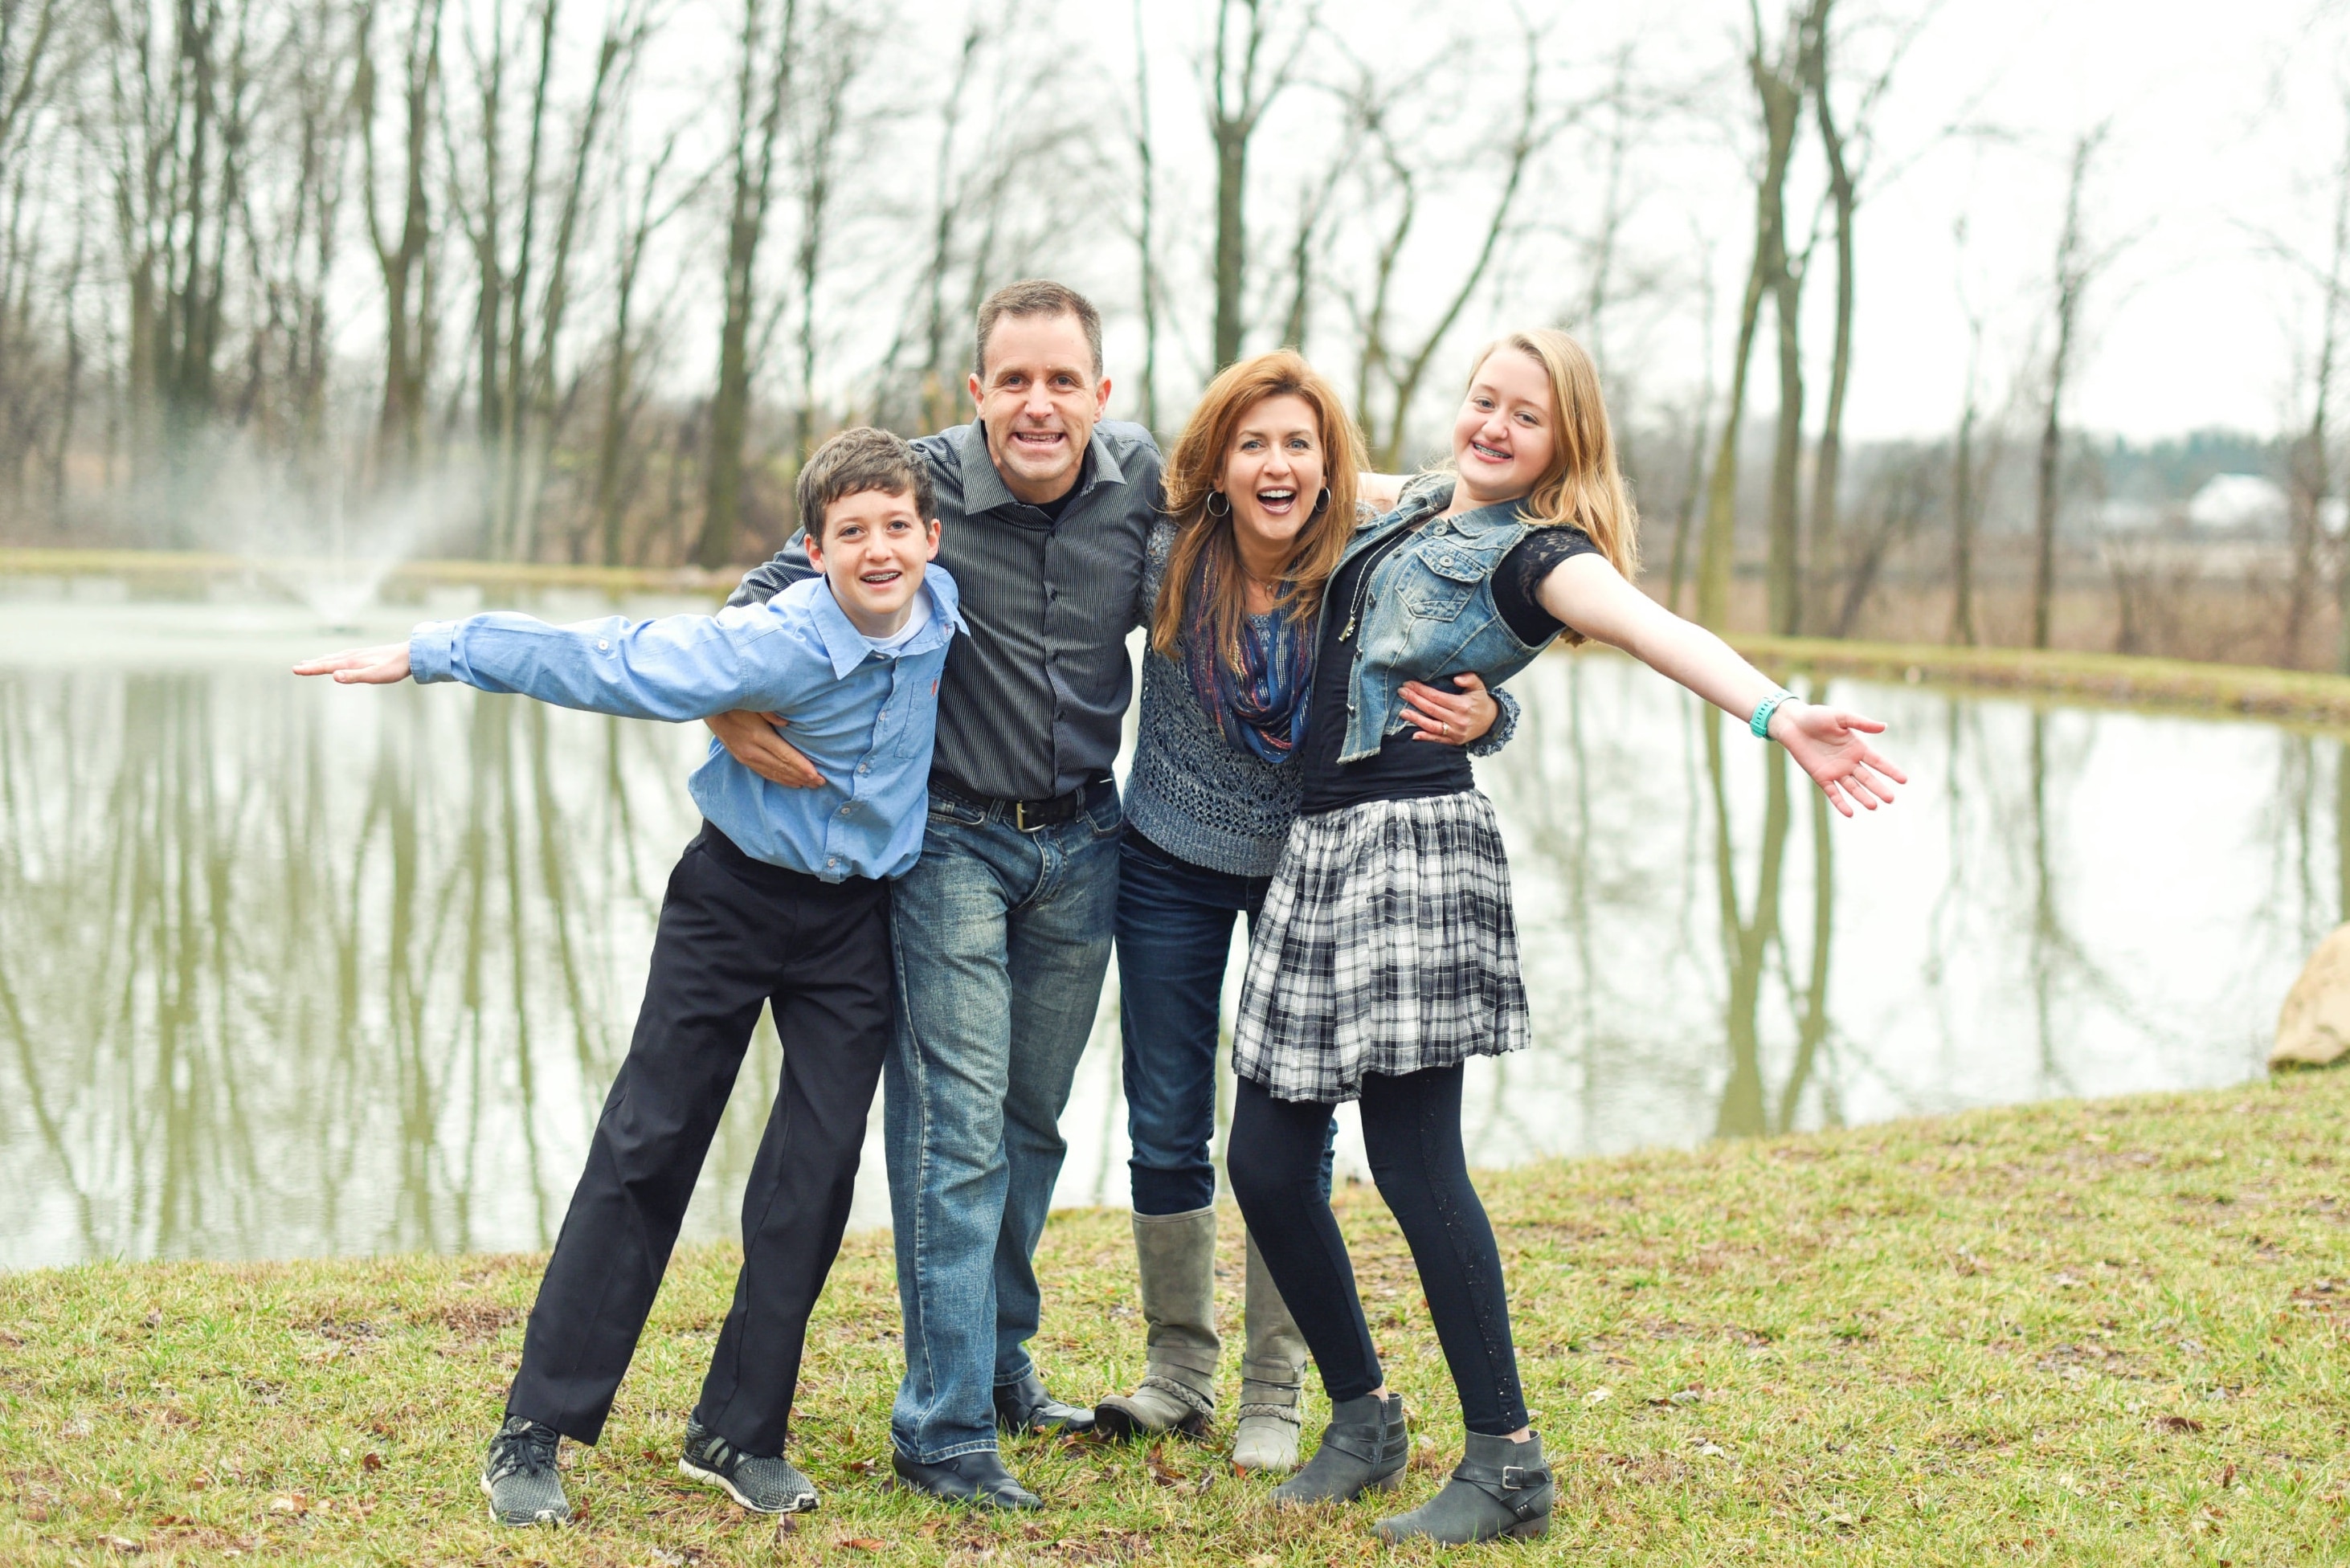 View More: http://susiemariephotography.pass.us/the-fulton-family